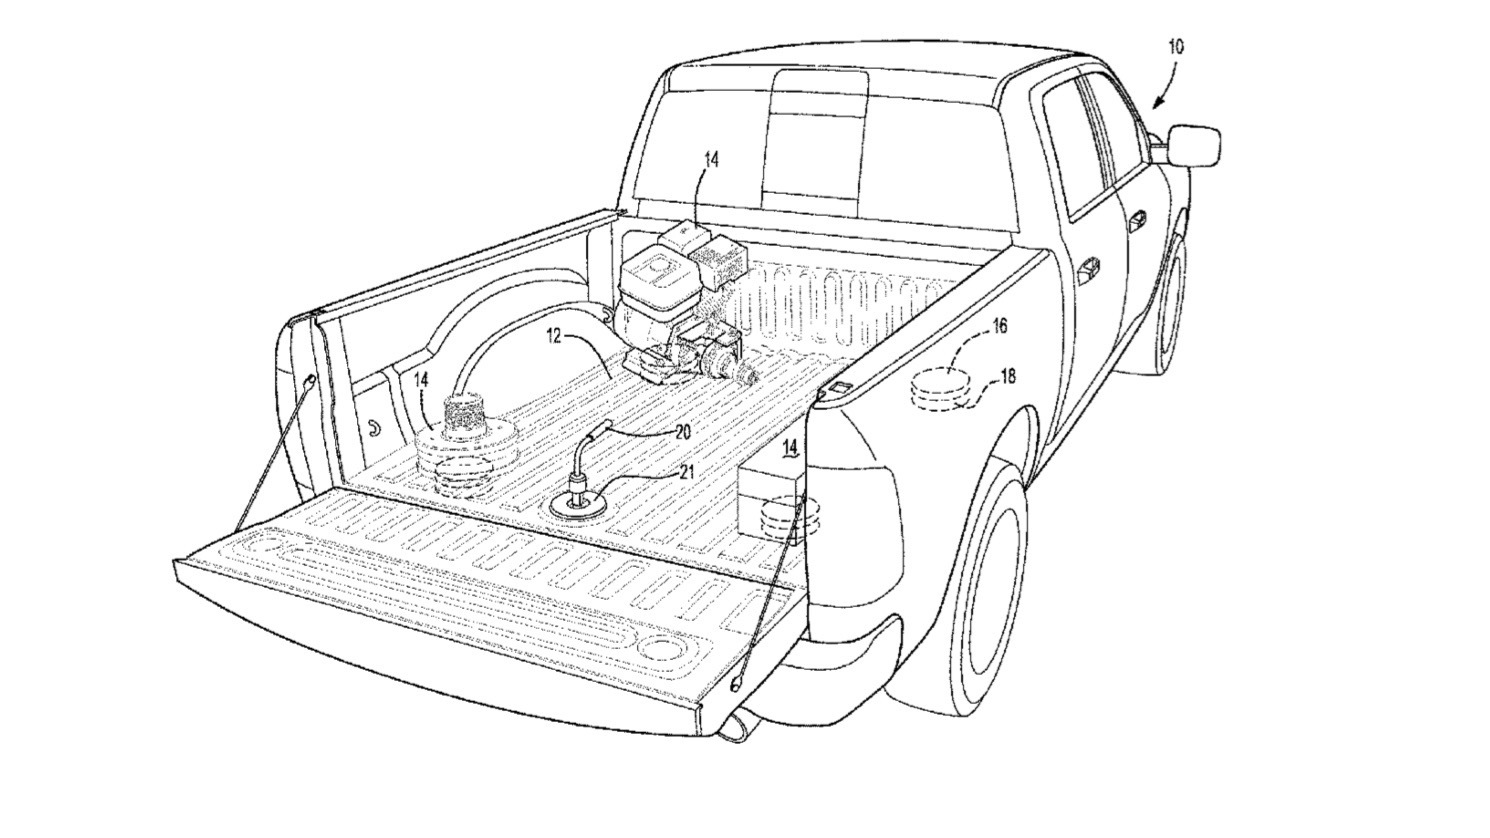 Ford magnetic pickup truck bed patent image